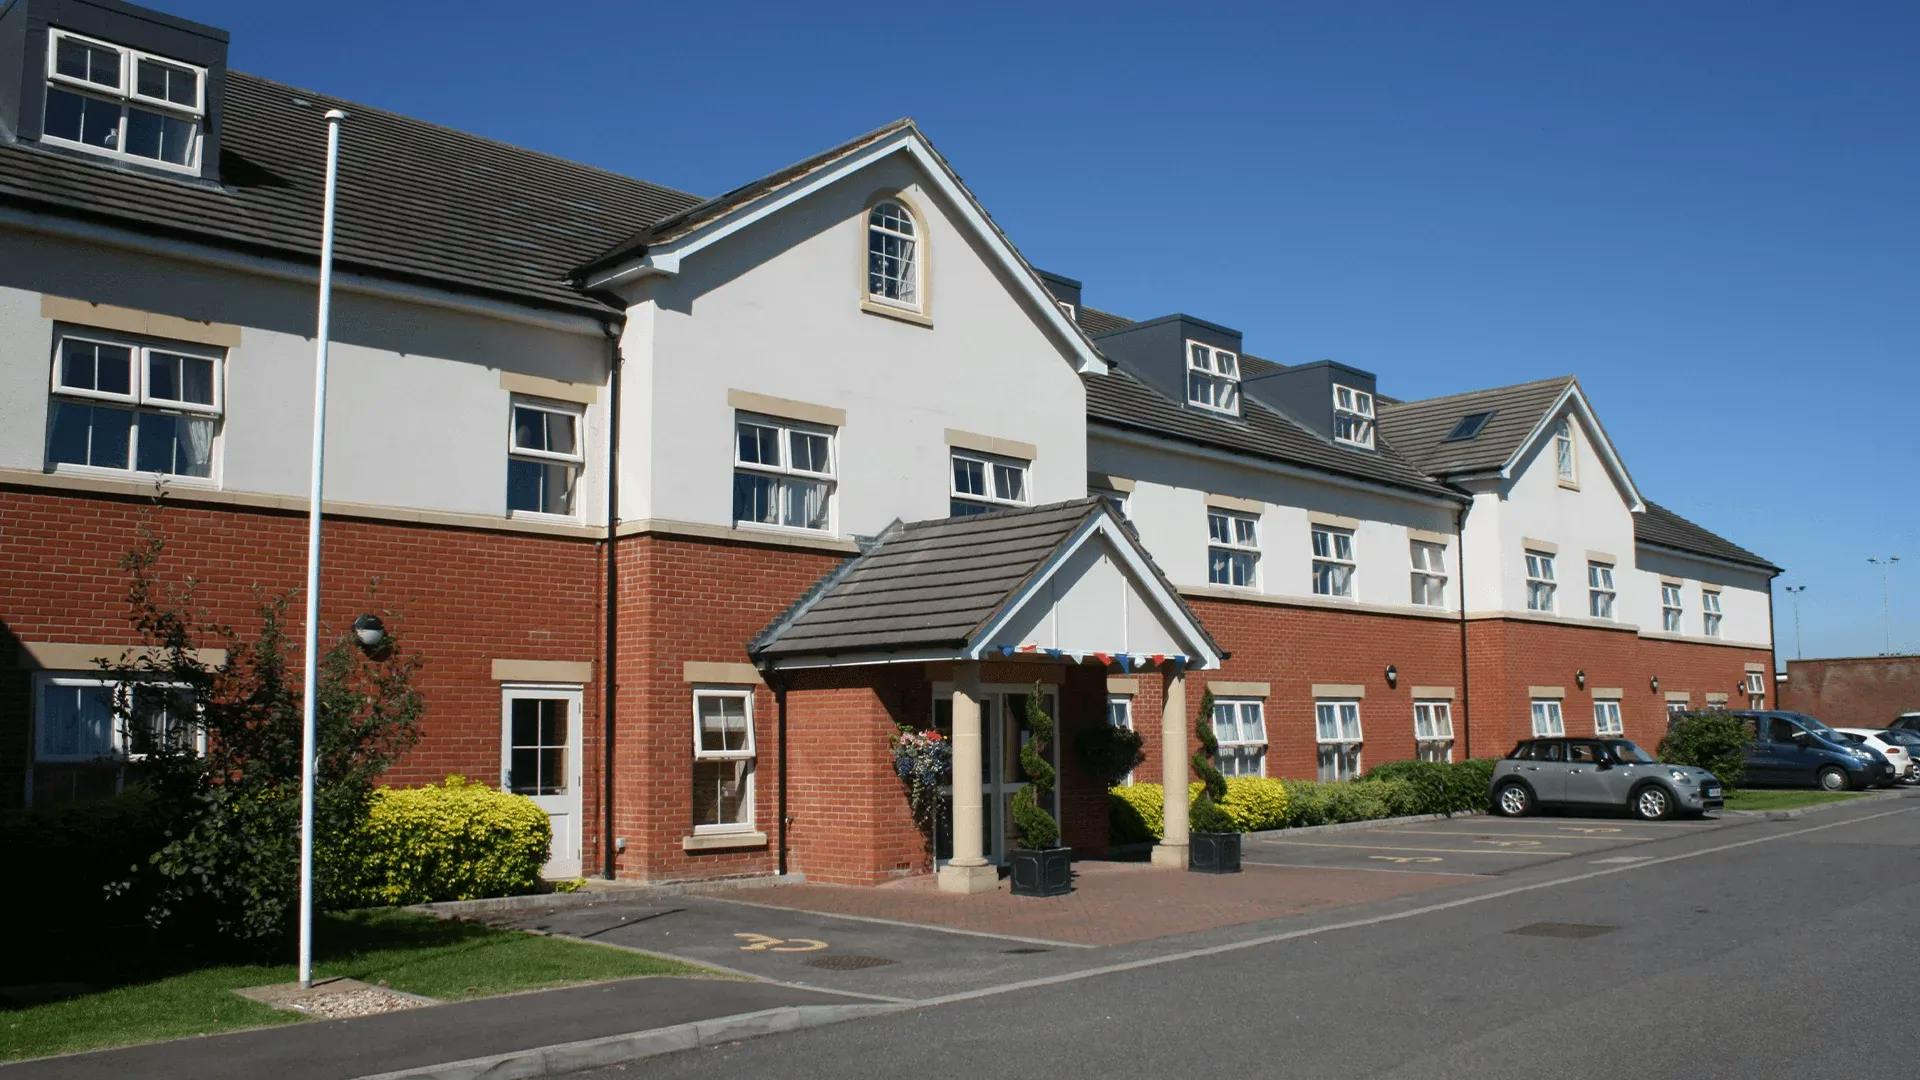 Seagrave House care home